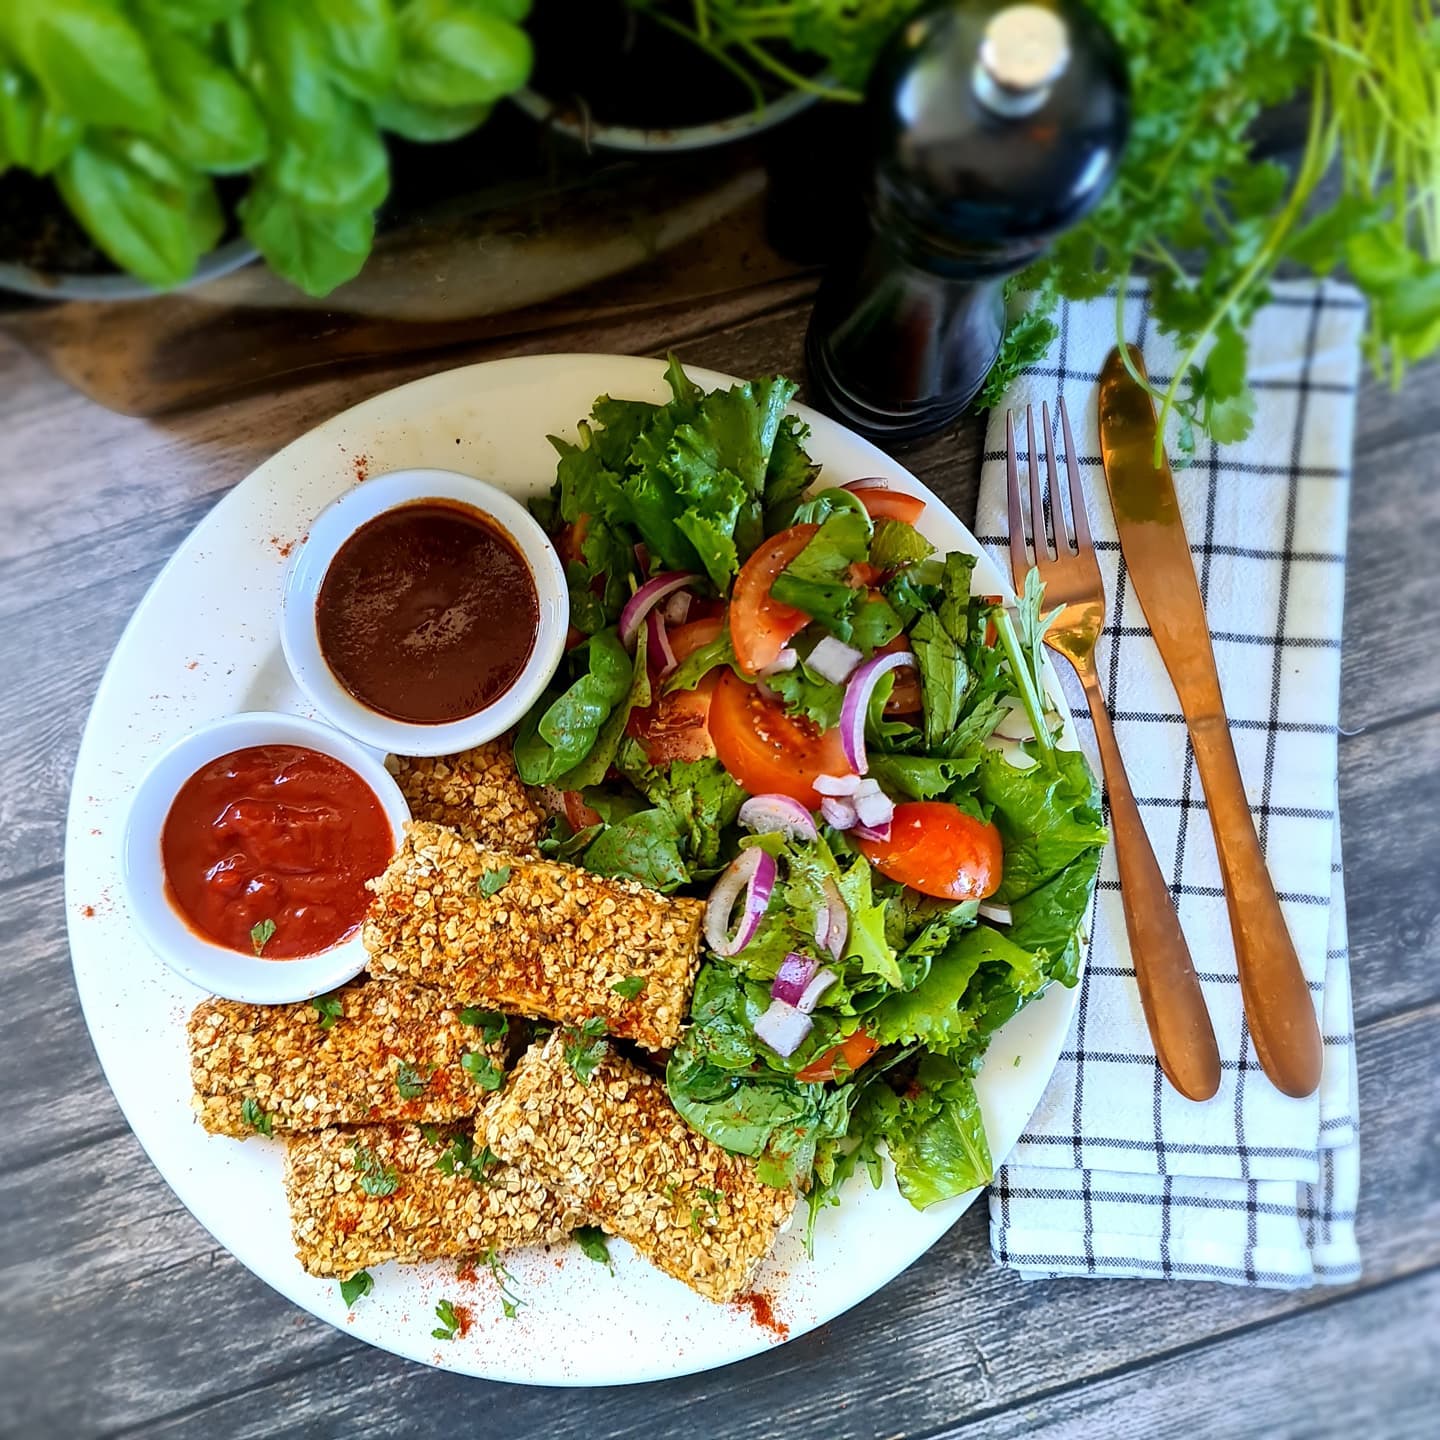 Crispy Southern Fried Tofu Dippers with Bbq Sauce